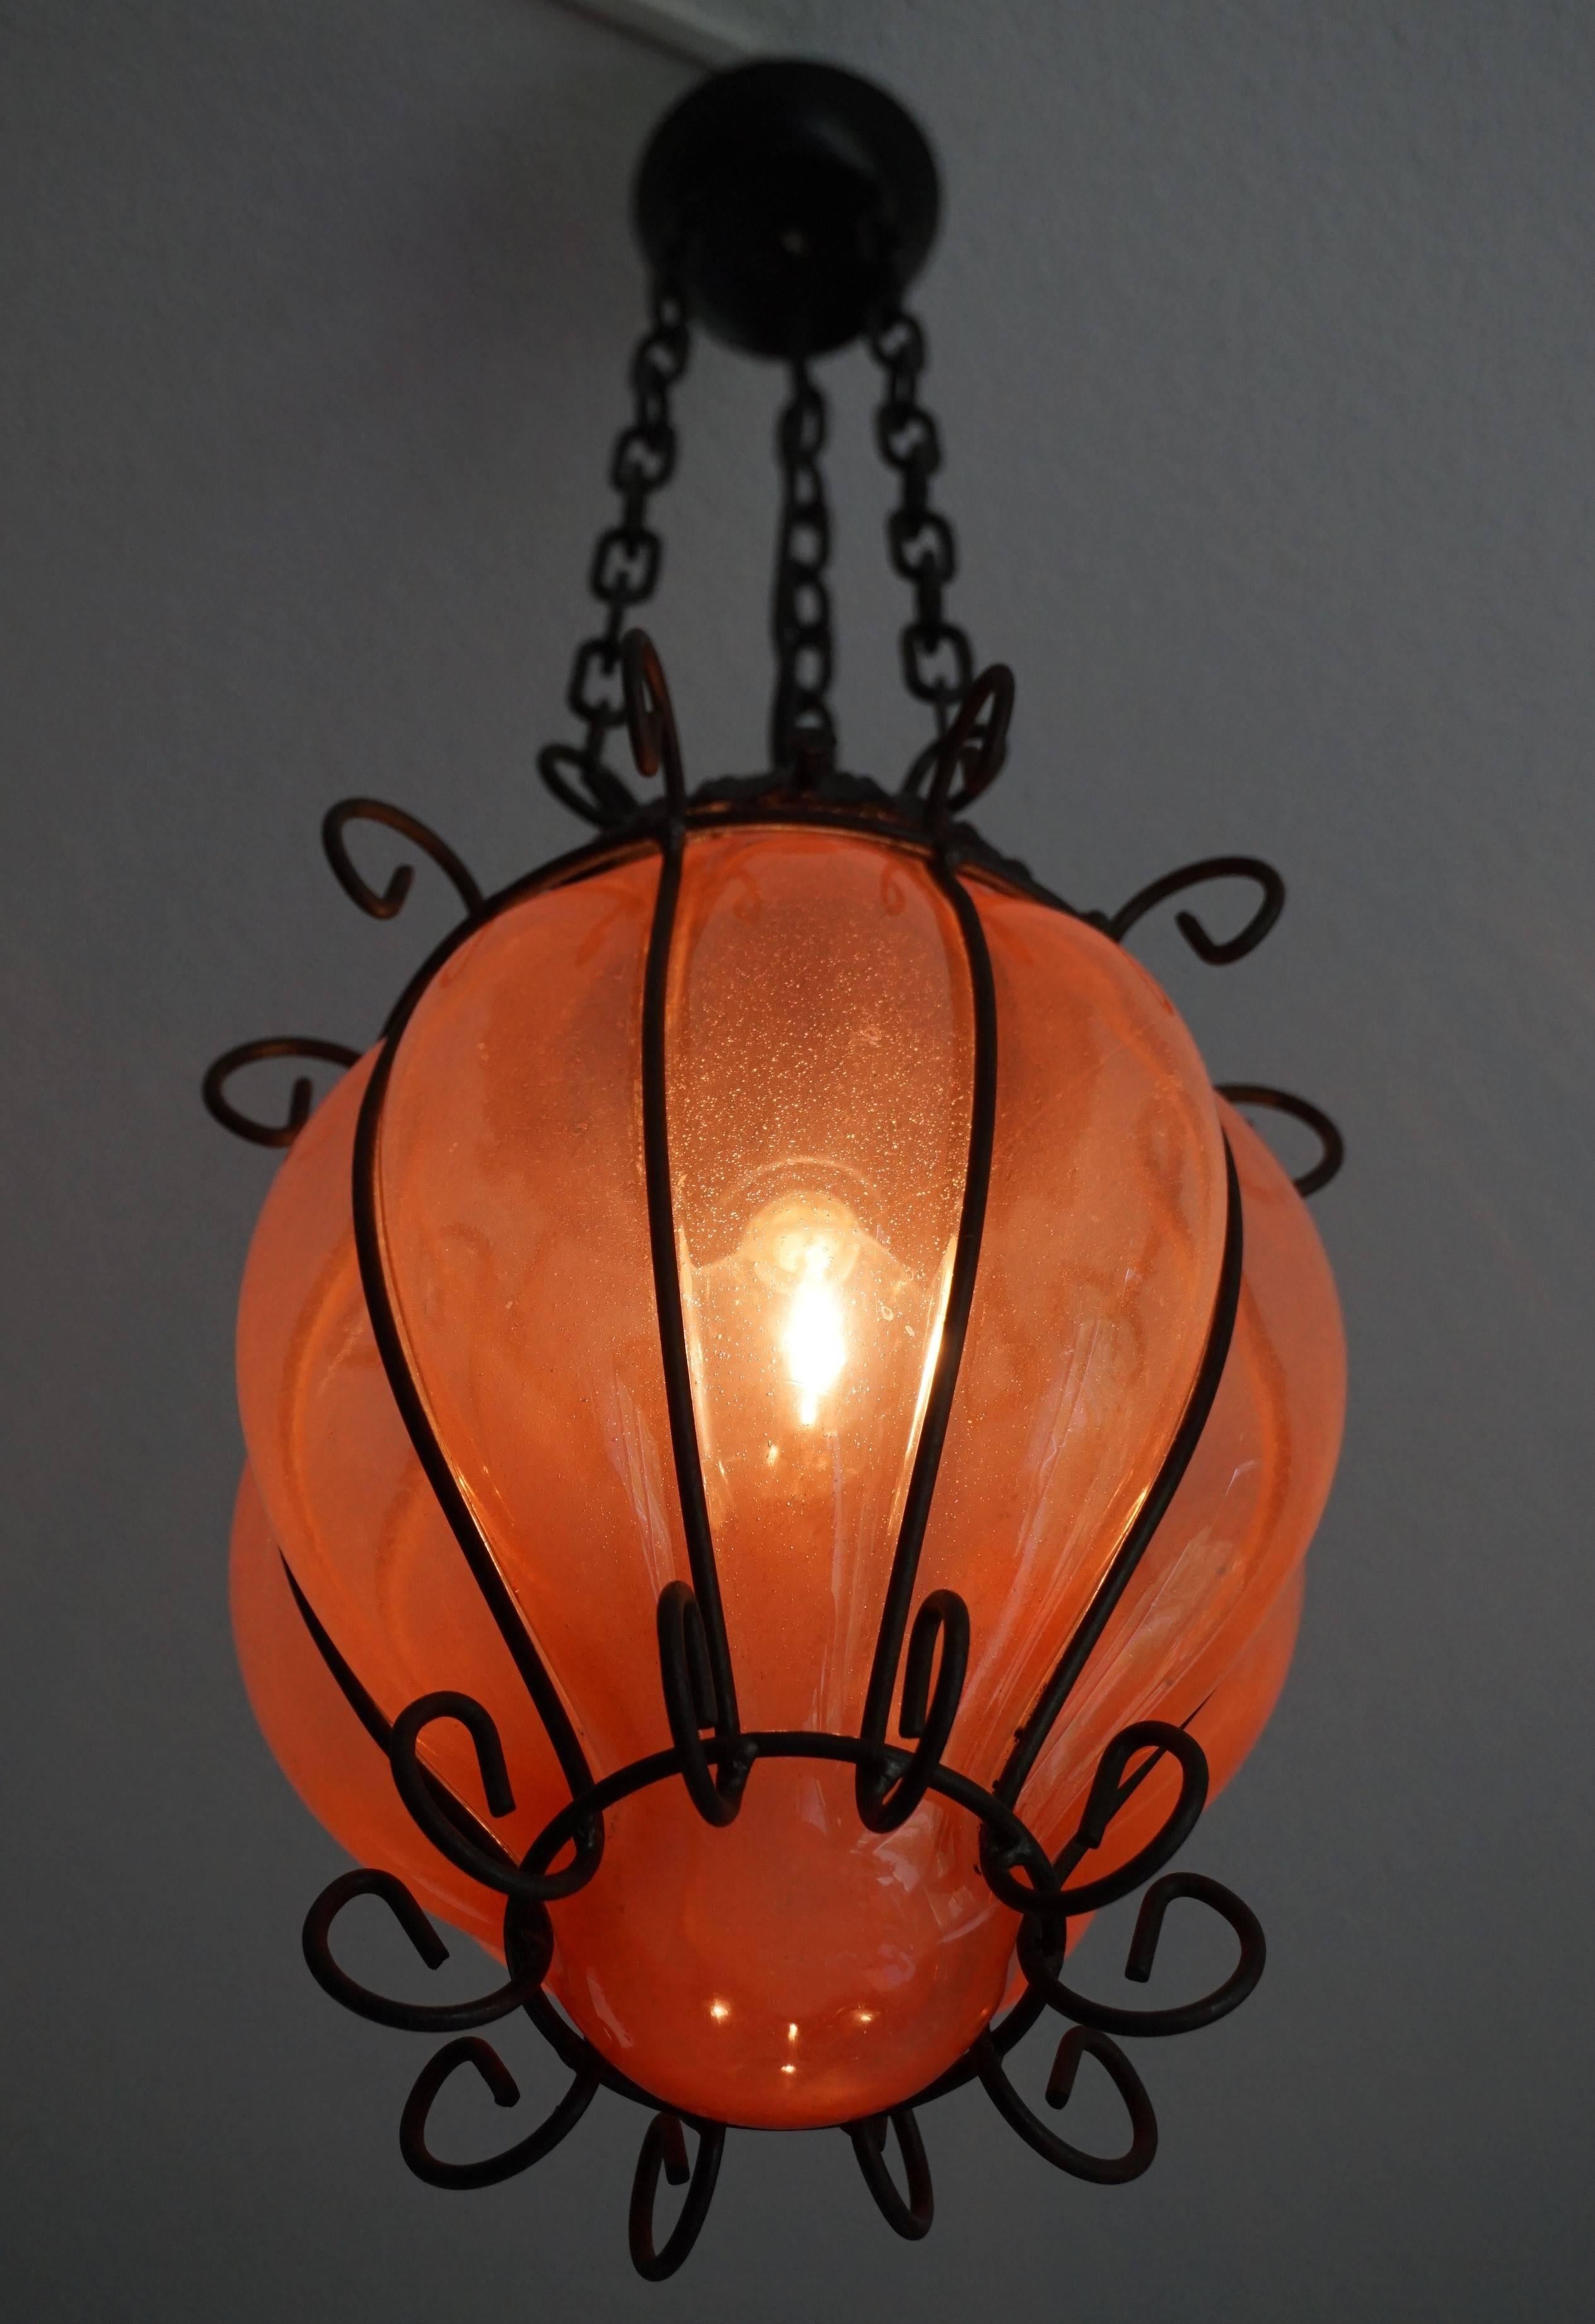 Beautifully mouthblown, reddish glass in metal frame, from circa 1950.

This timeless single light pendant is beautiful in shape and the mouth blown, red glass is a rare sight to see. This one of a kind lamp could create the perfect atmosphere in a